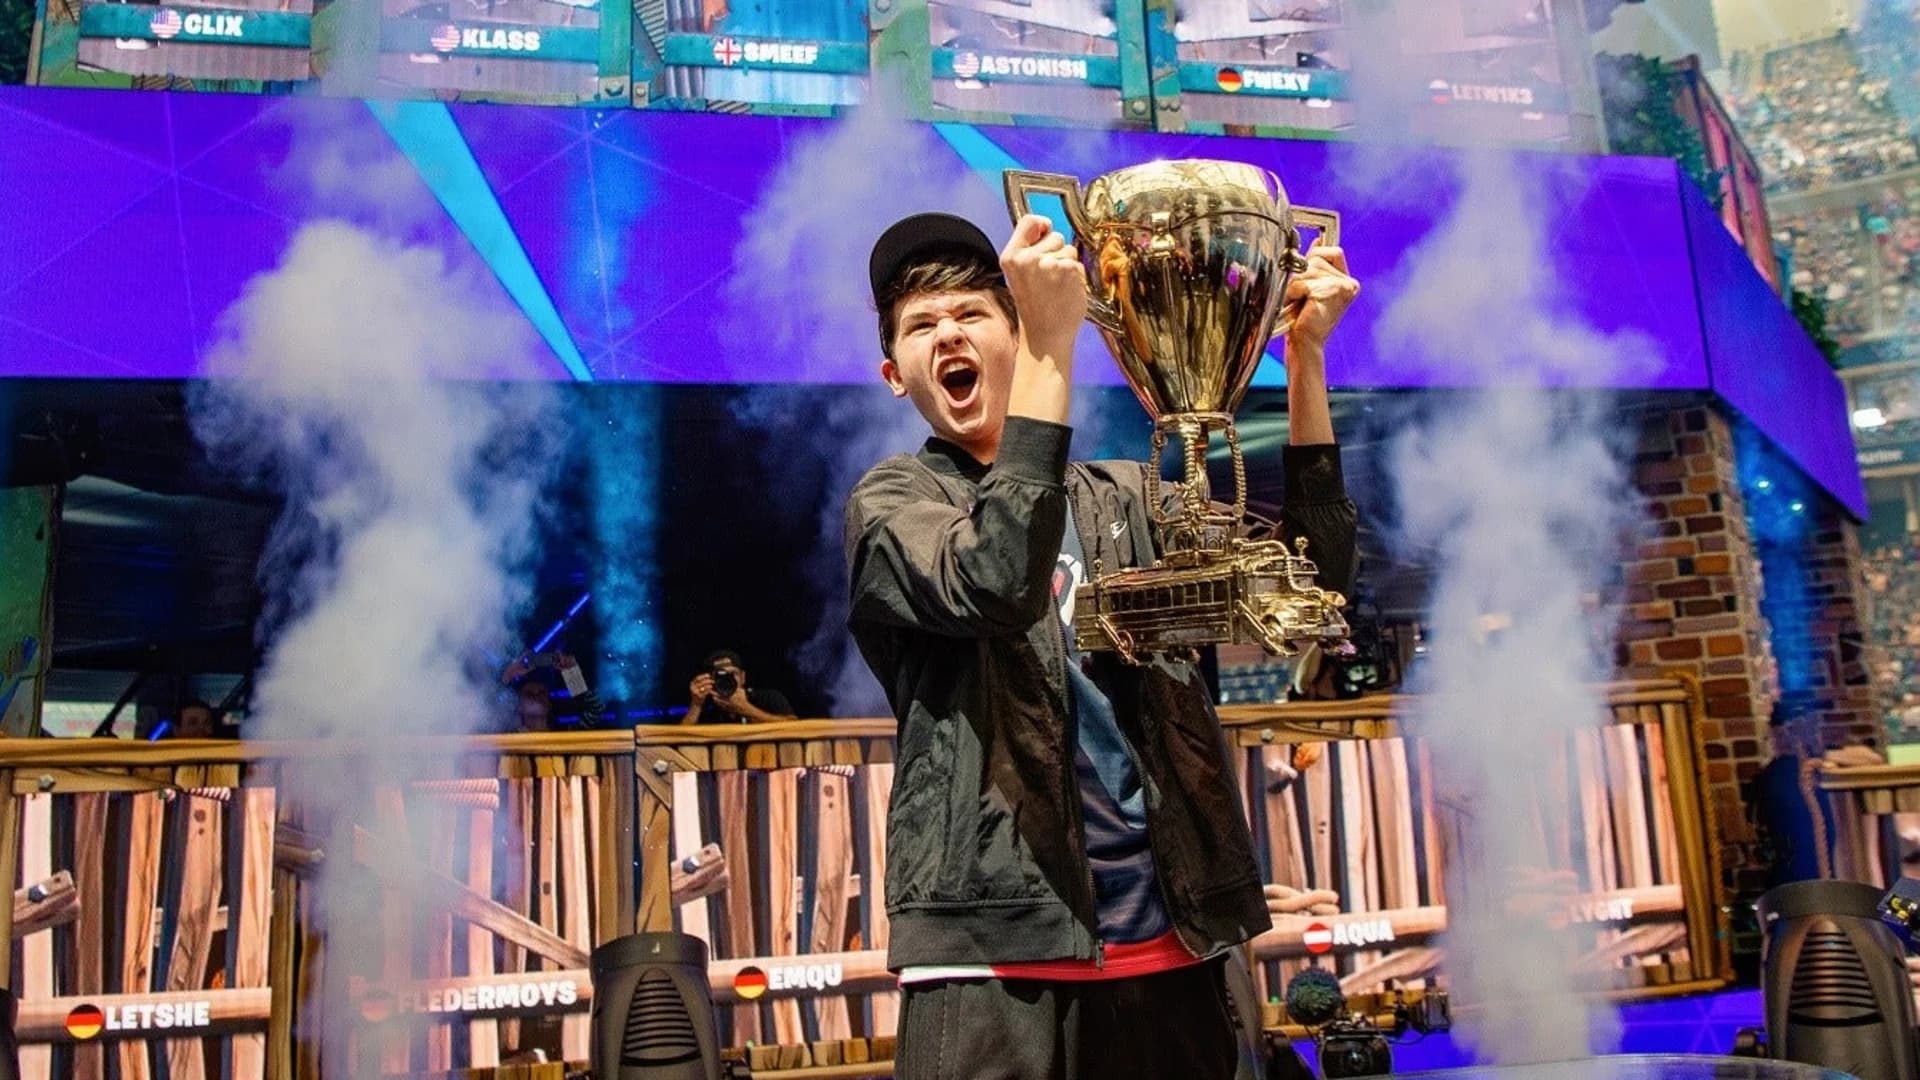 16-year-old Fortnite champion ‘swatted’ while livestreaming